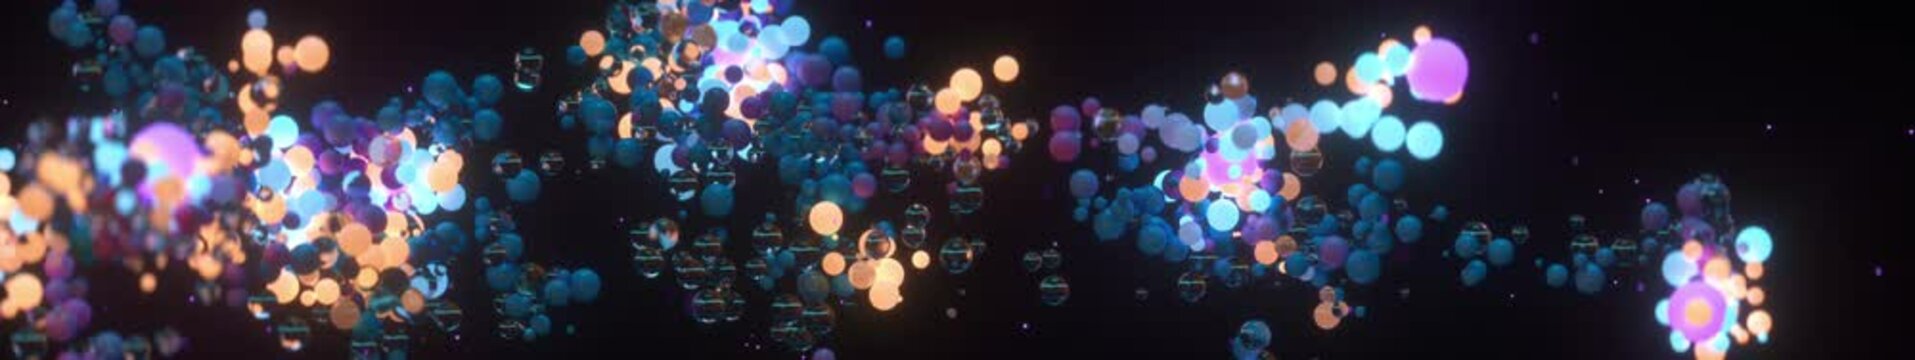 Colorful Spheres Widescreen Particle Visual